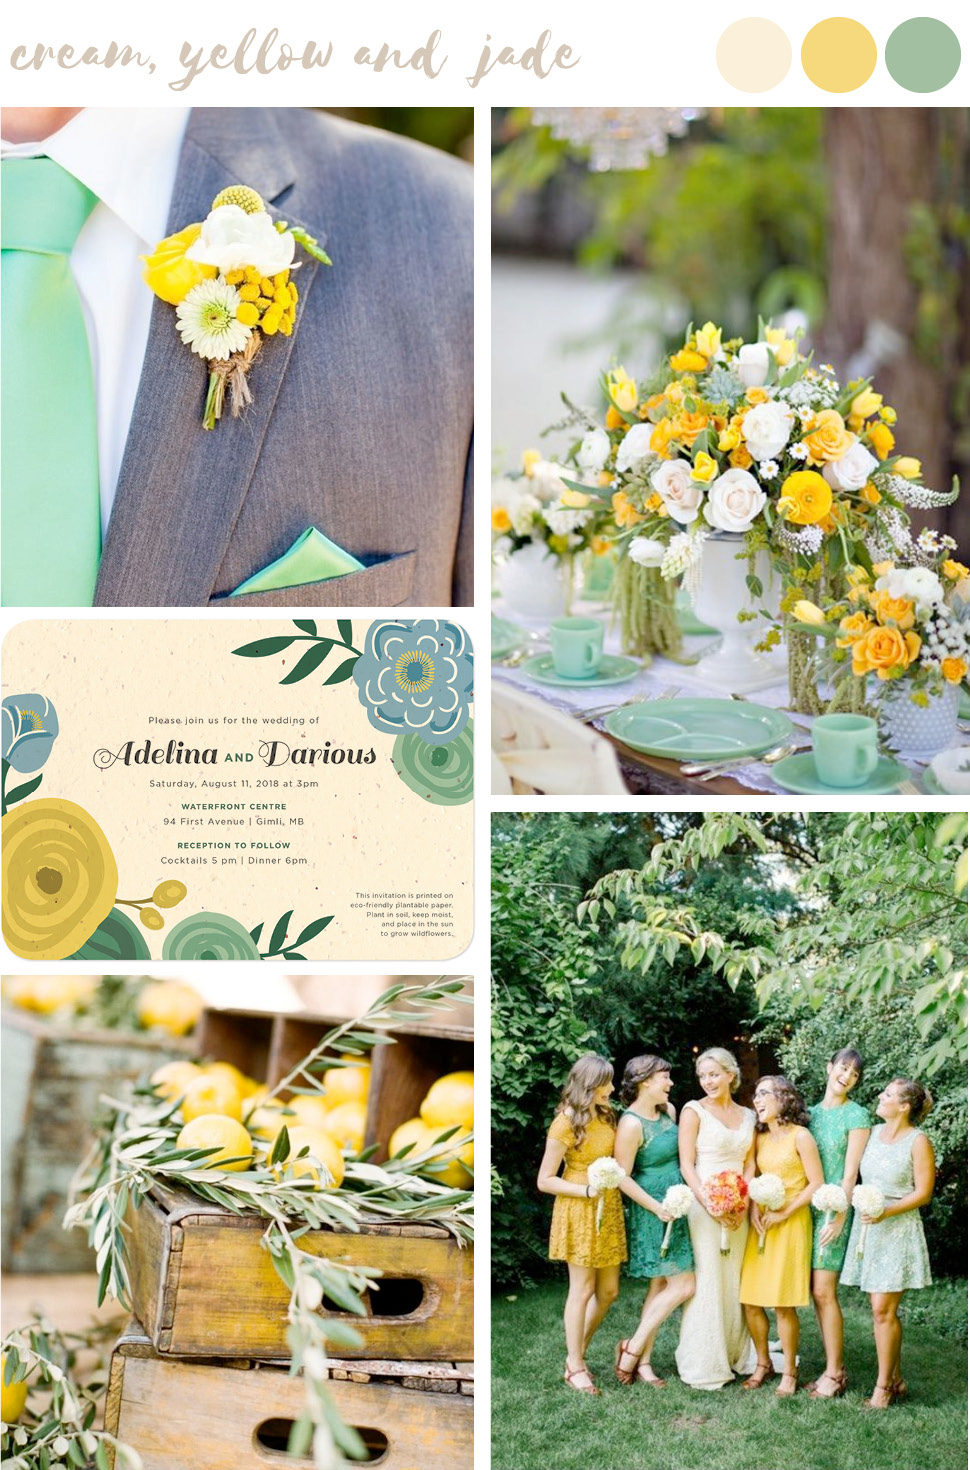 Find wedding color inspiration like this charming blend of marigold yellows and jade for stylish and trendy summer weddings.